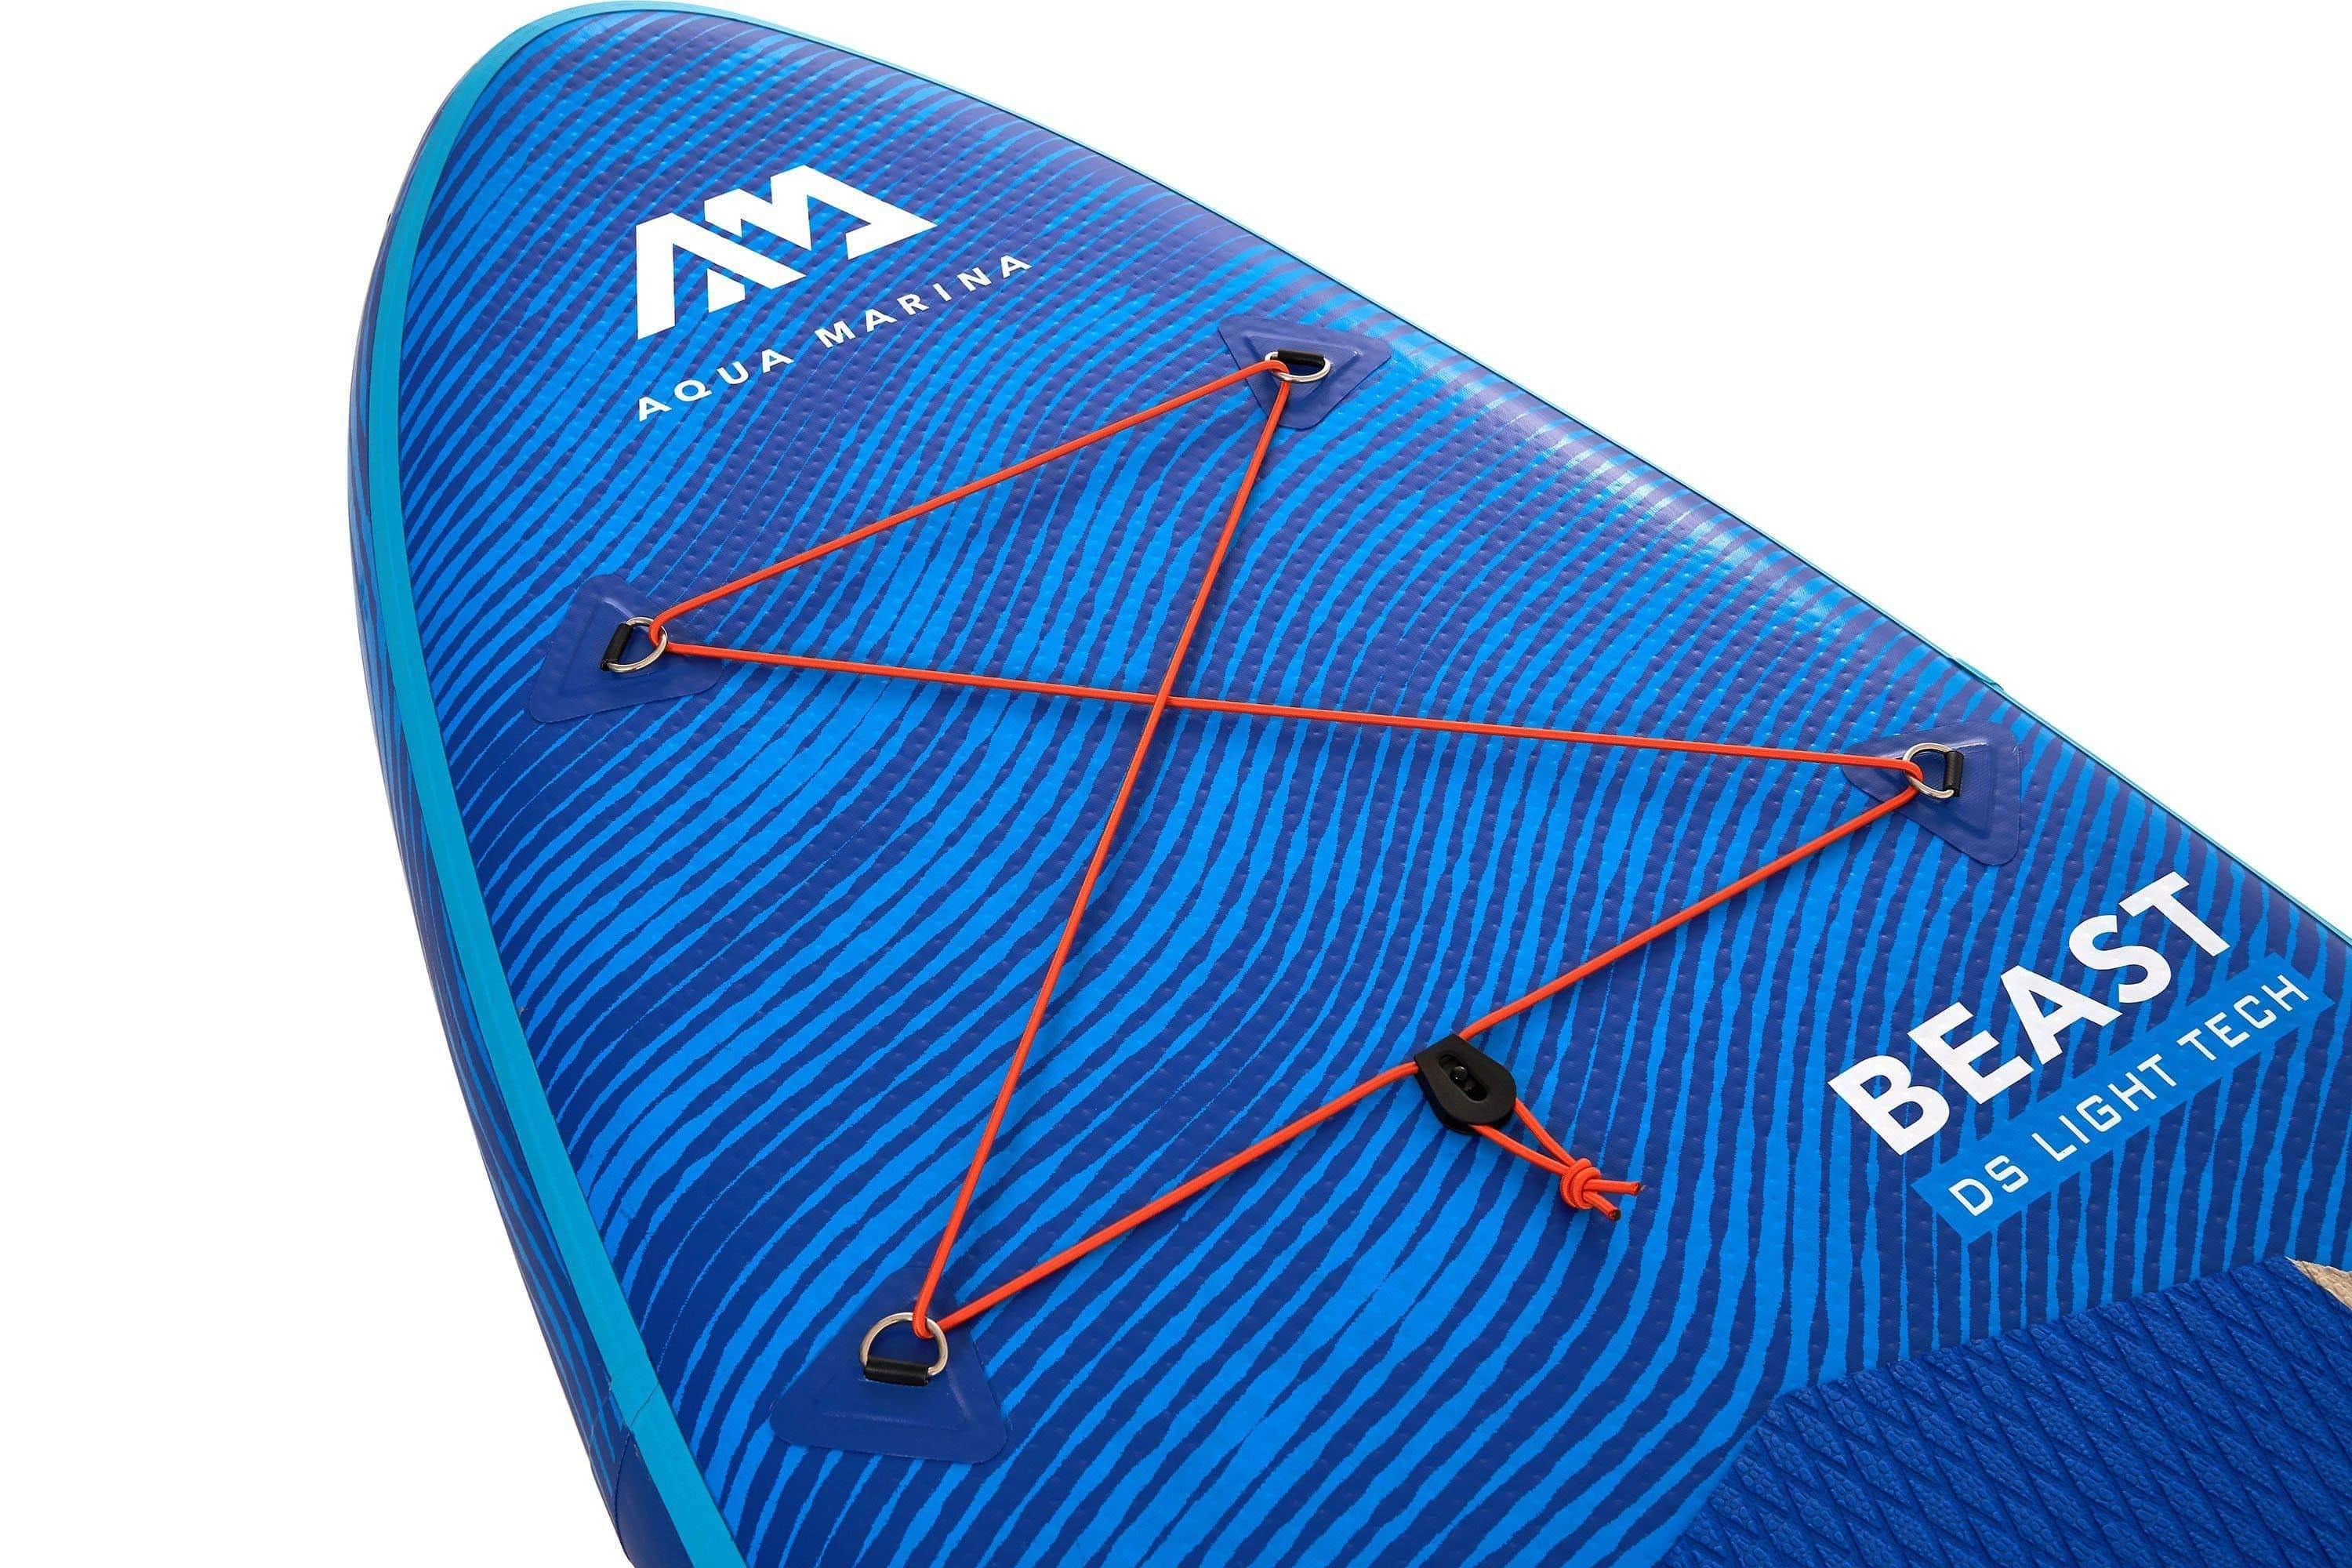 Beast Advanced All-Around iSUP Paddle Board - DTI Direct Canada